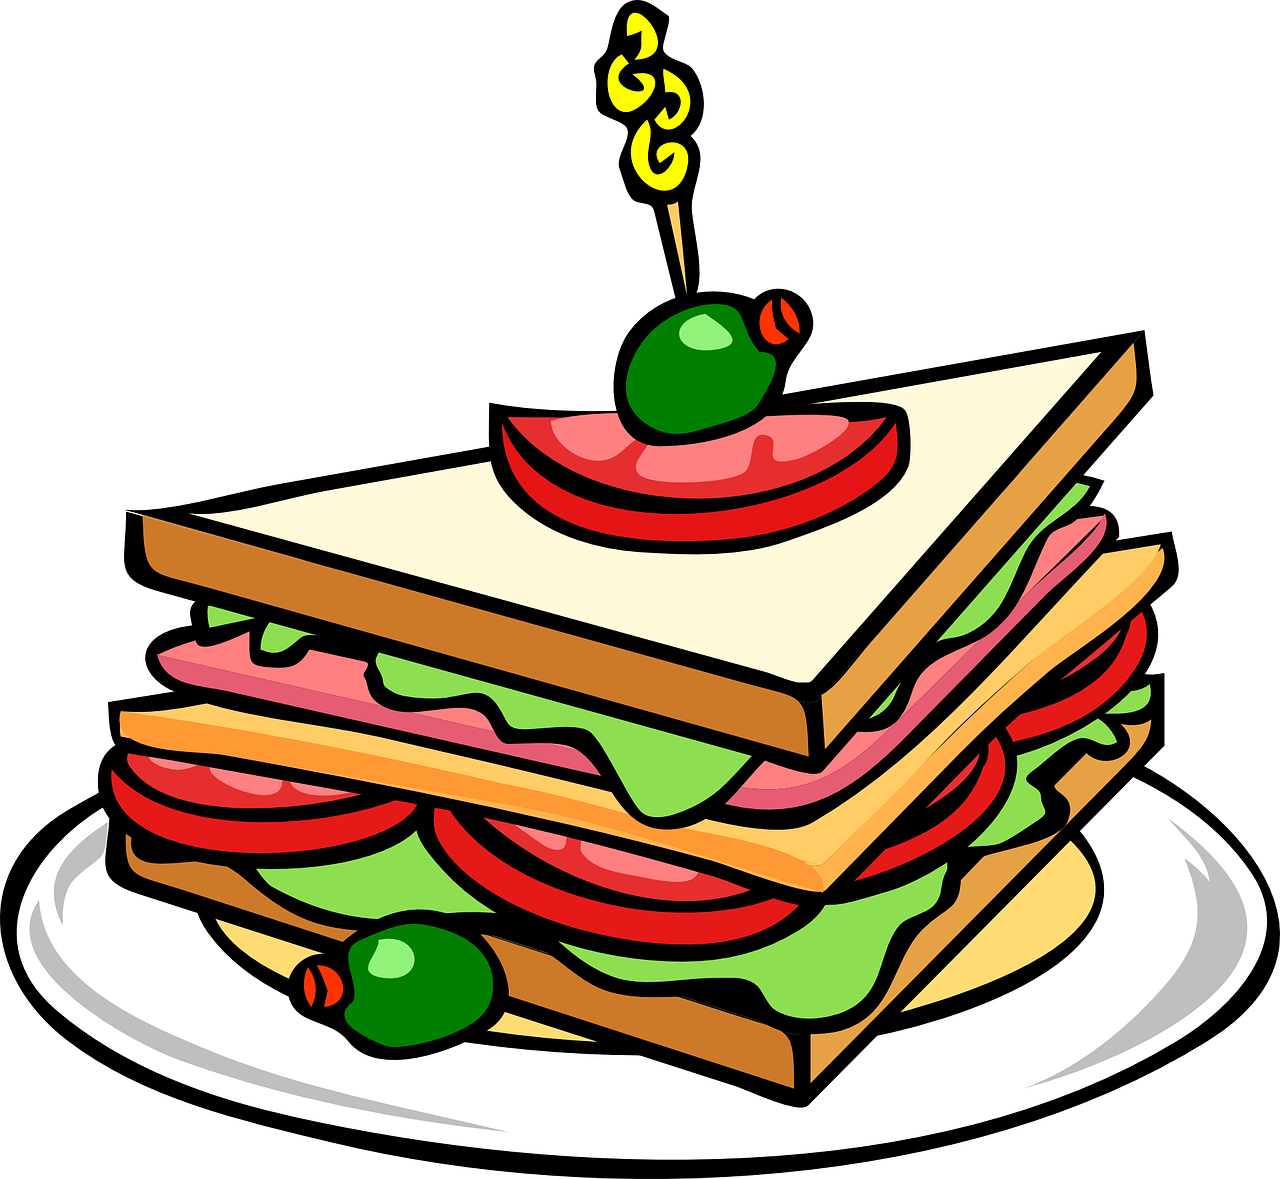 Illustration of a triangular sandwich, filled with ham, lettuce topped with a tomato and olive skewered at the top on a white plate